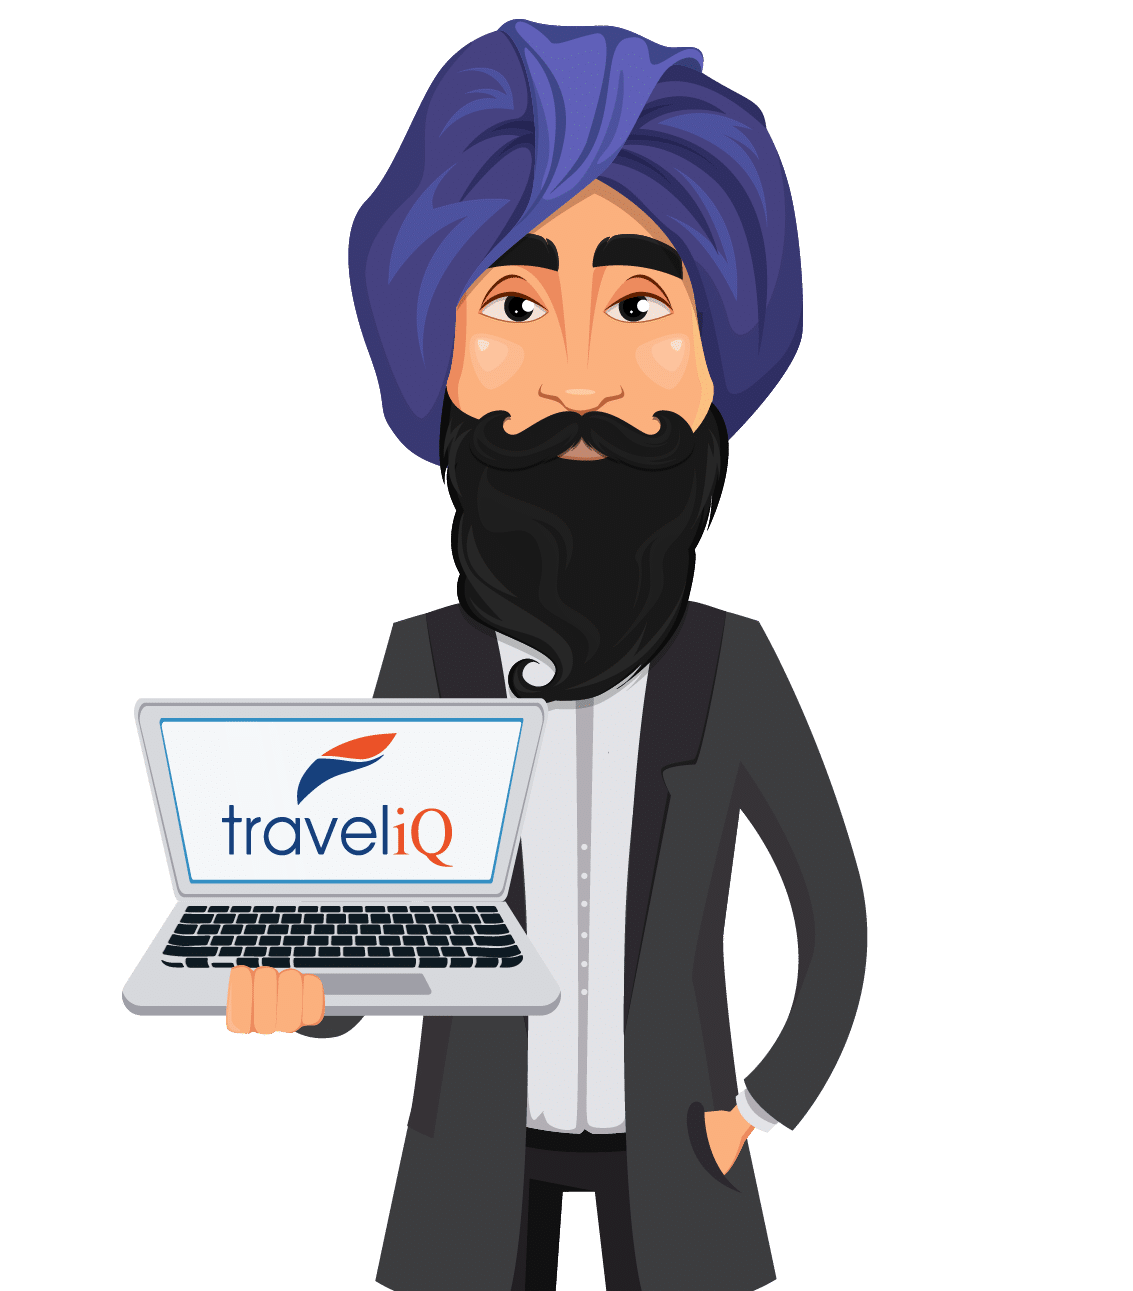 TravelIQ - IRCTC Agent Registration Fees Rs - 1000 Only